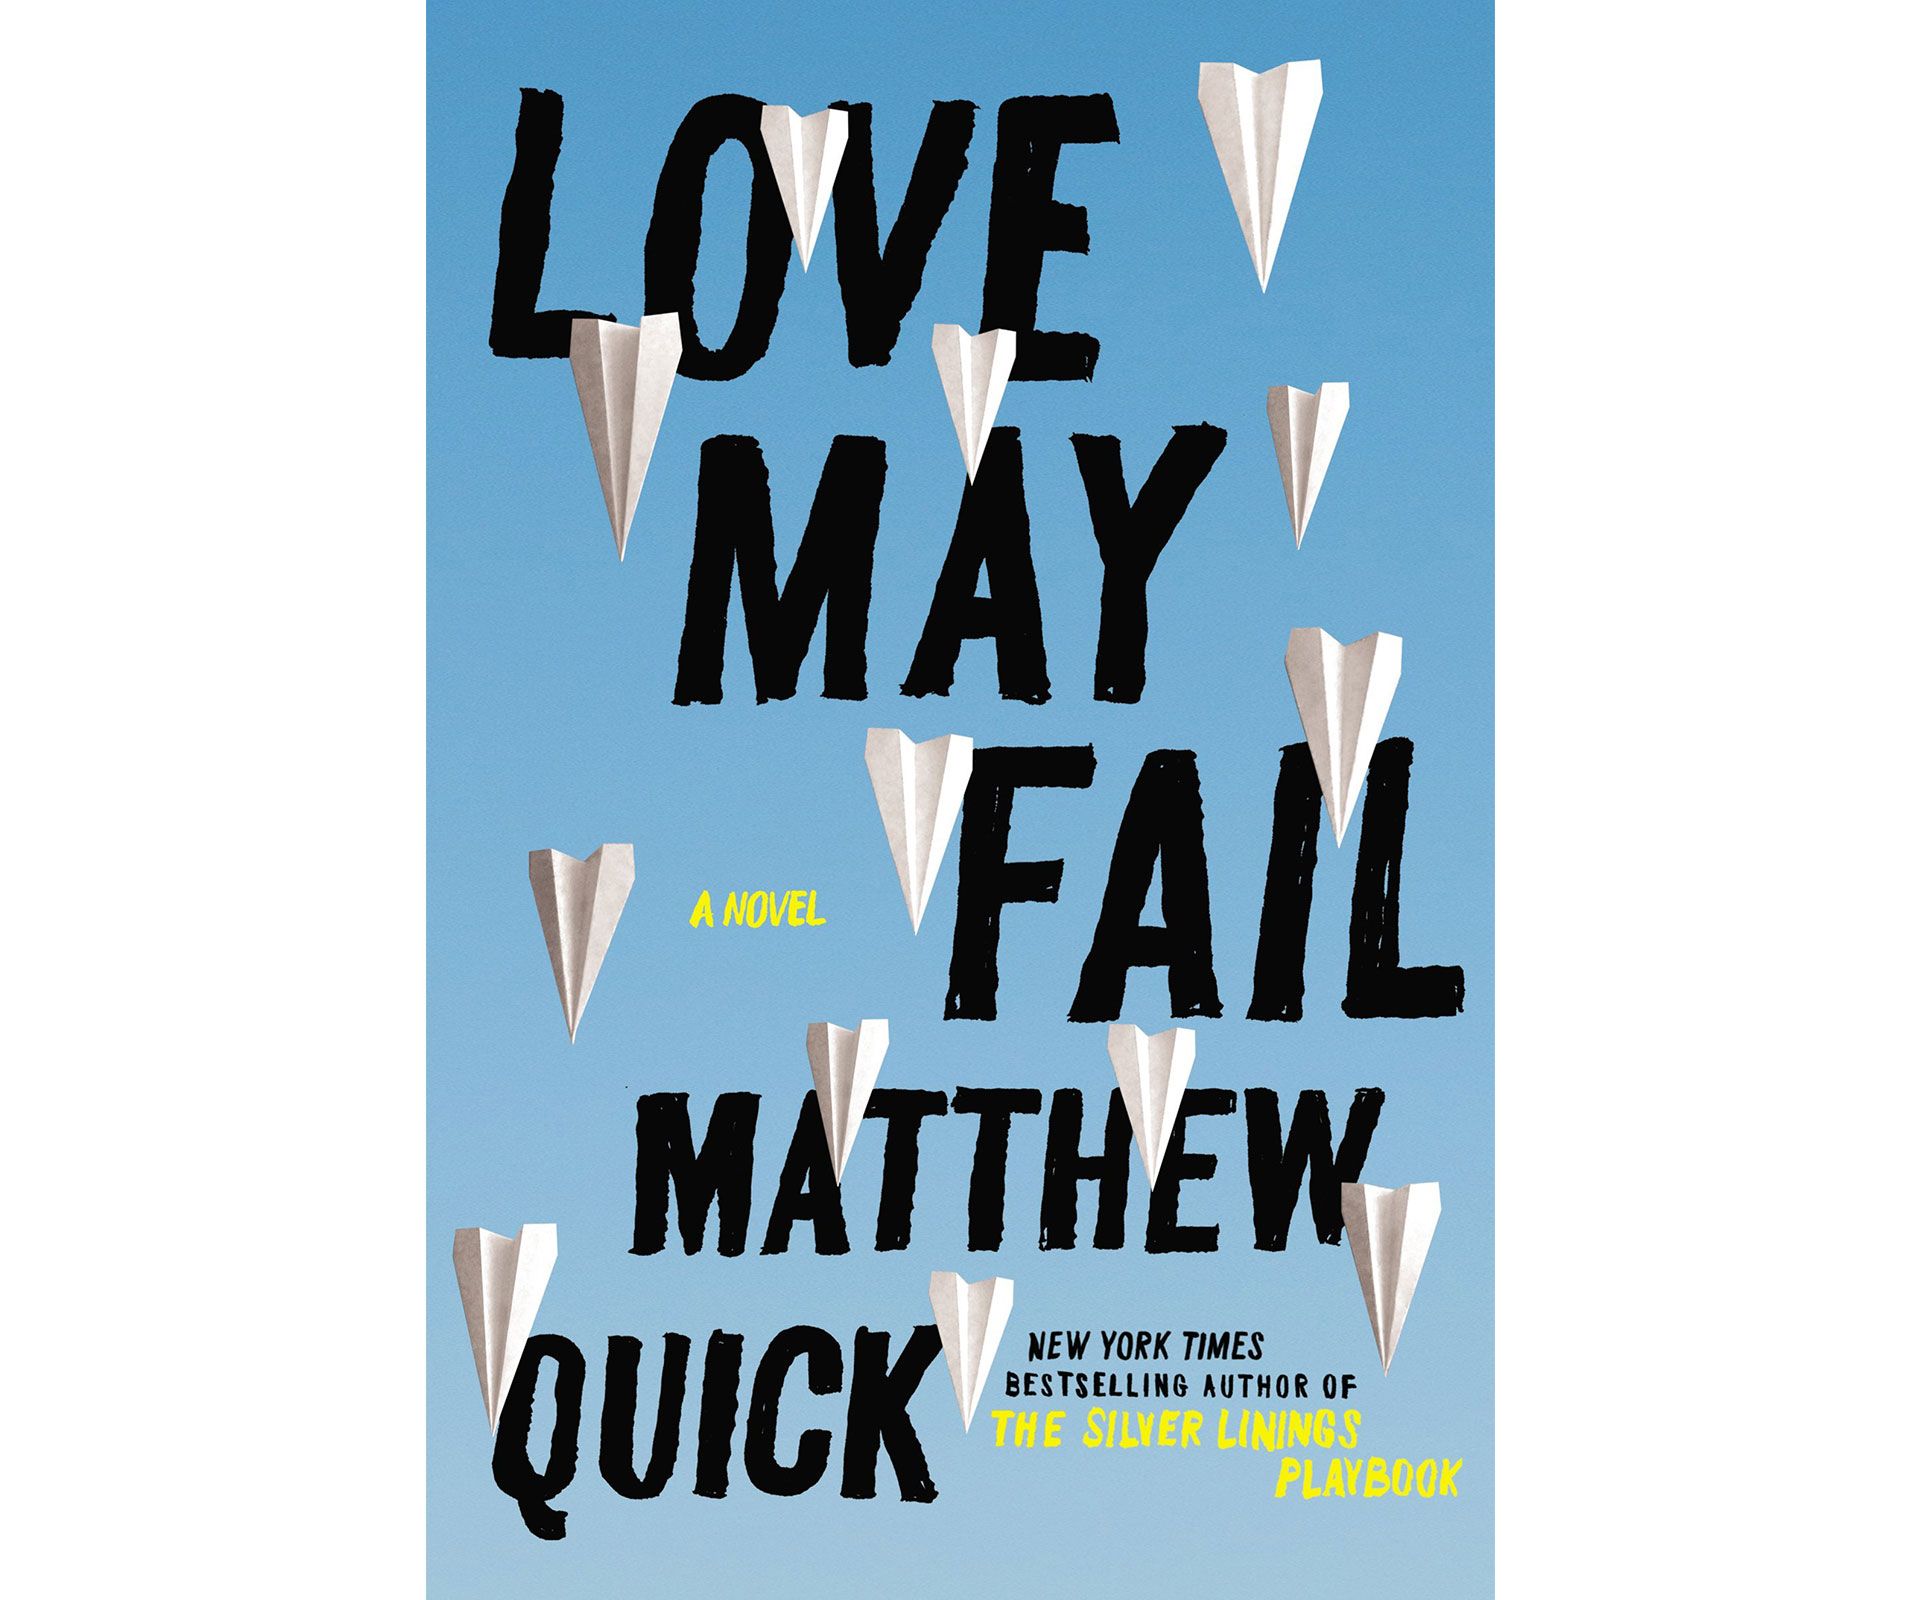 Love May Fail by Matthew Quick